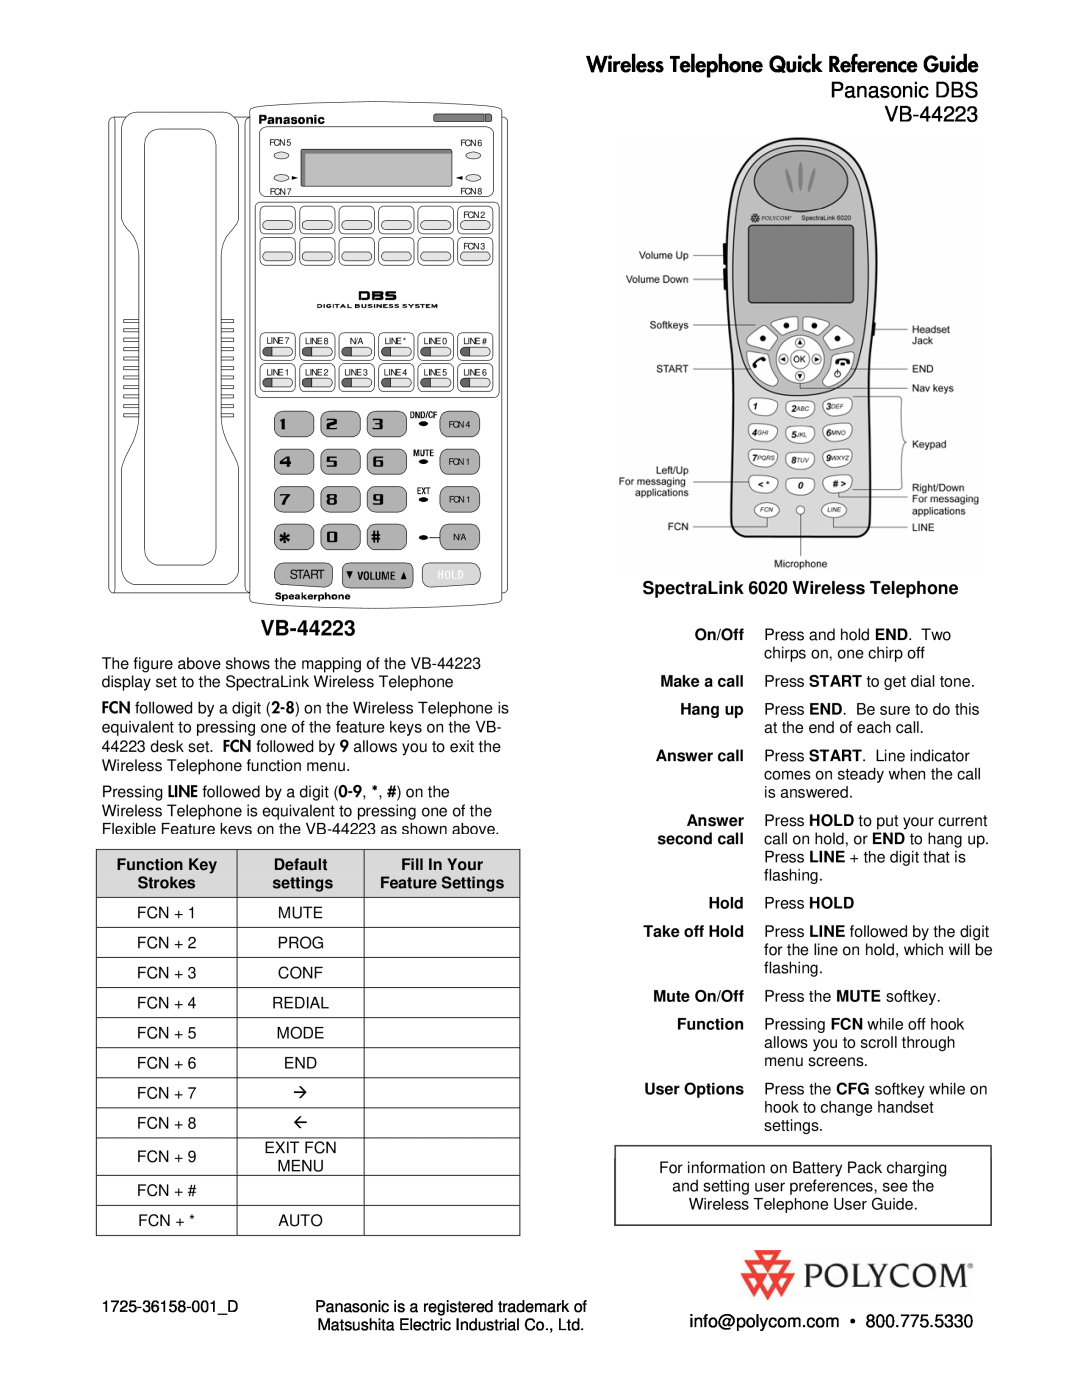 Polycom manual Wireless Telephone Quick Reference Guide Panasonic DBS VB-44223, SpectraLink 6020 Wireless Telephone 